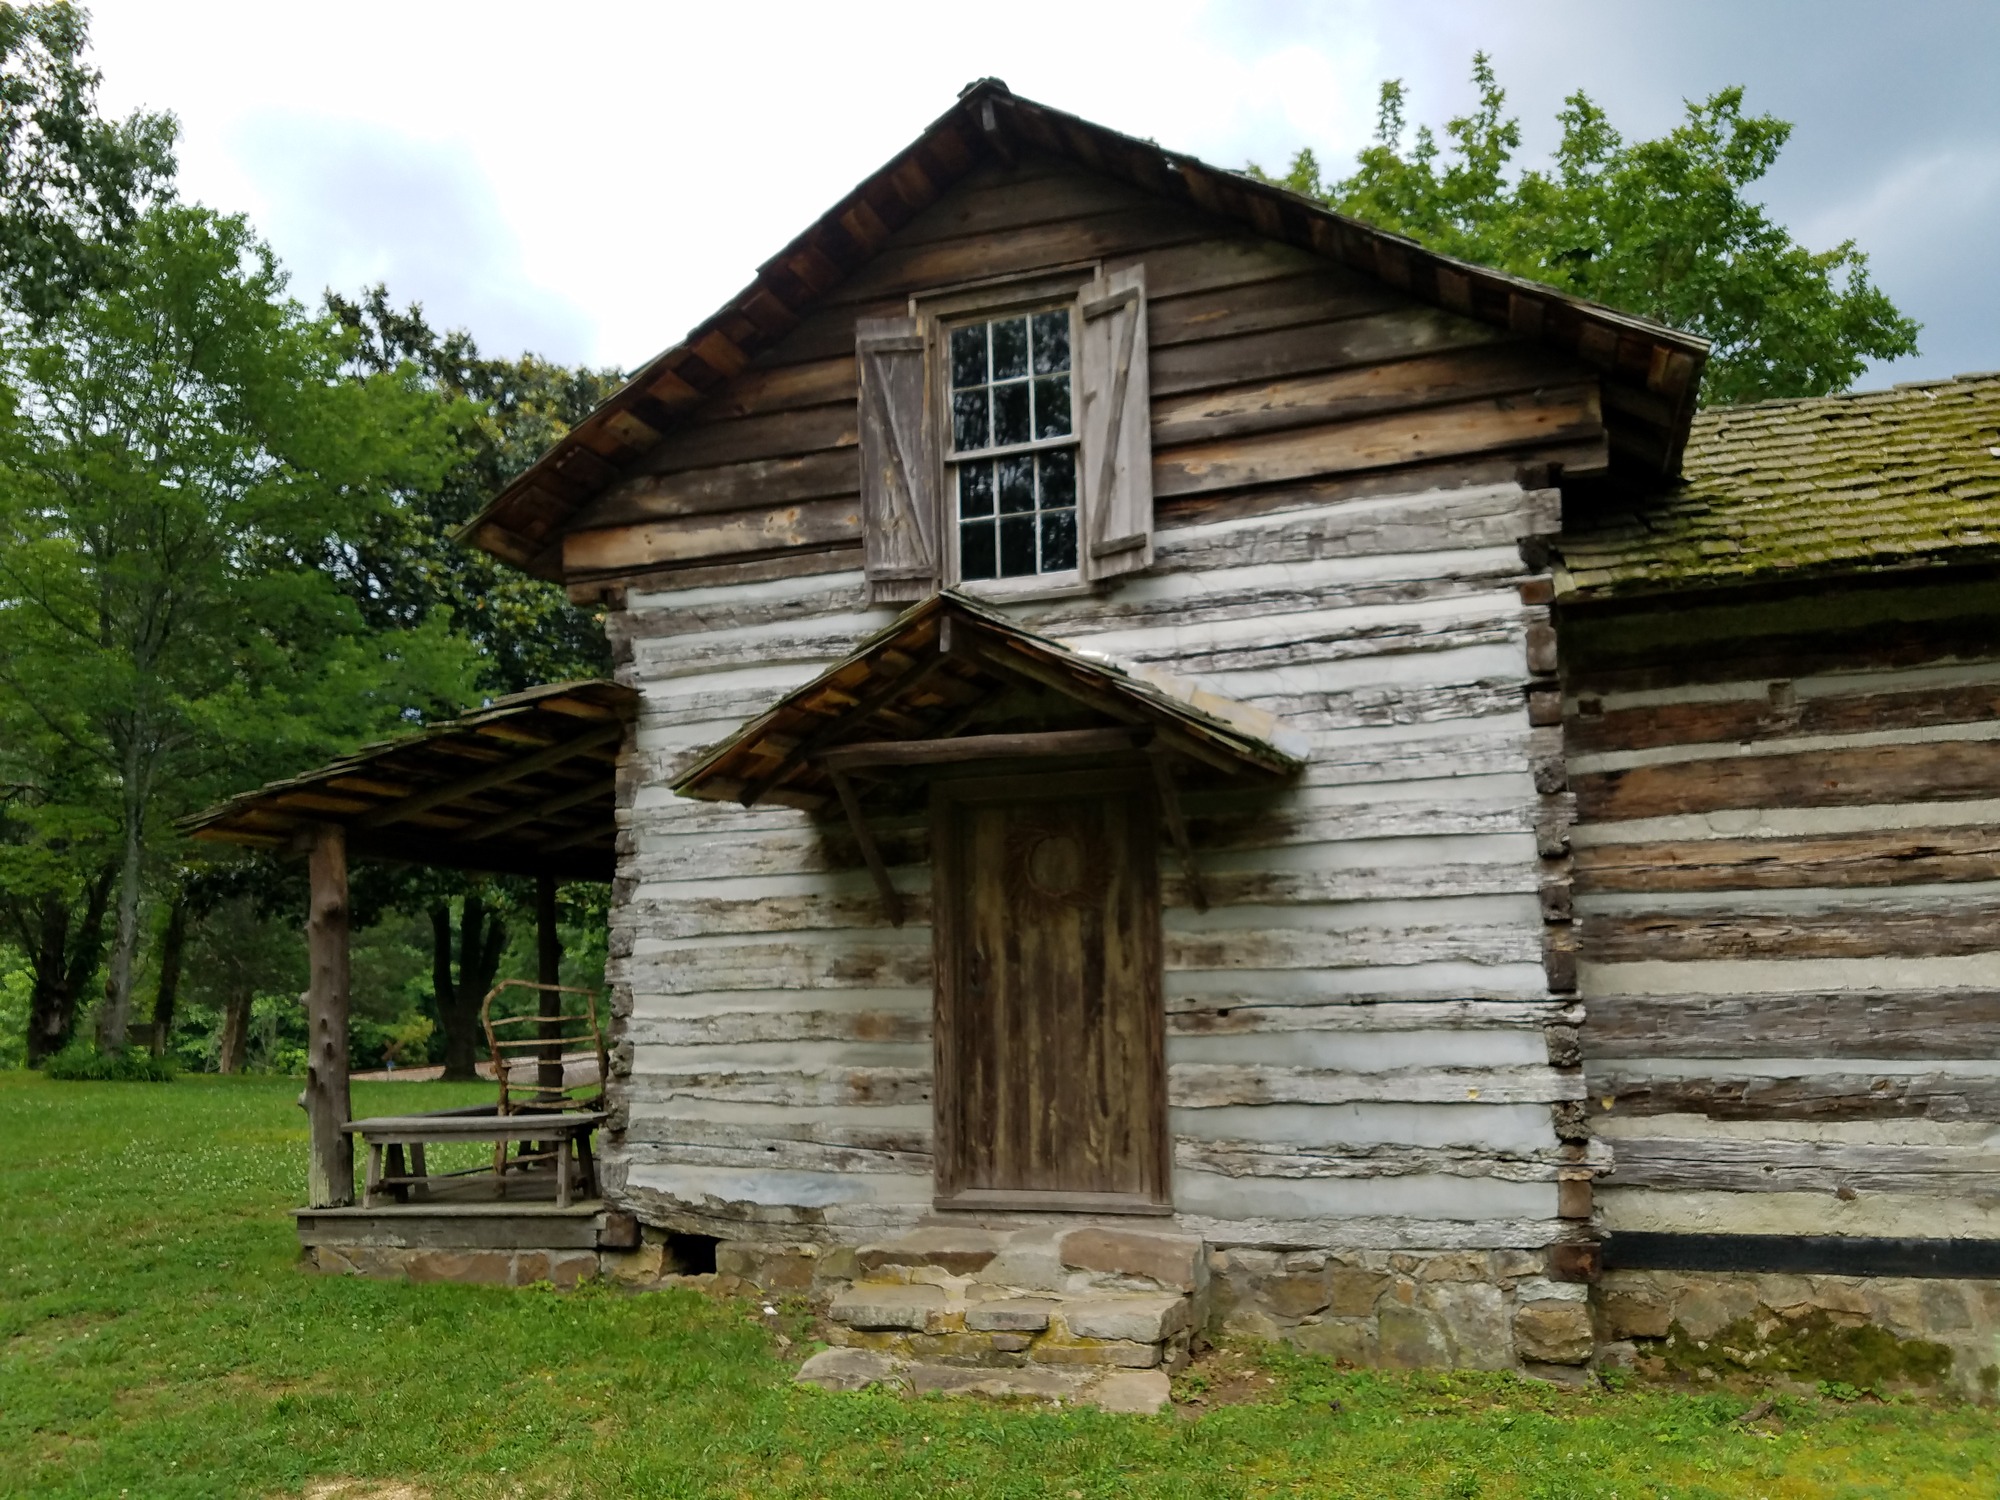 The original structure of Spring Frog Cabin at Audubon Acres in Chattanooga, Tennessee